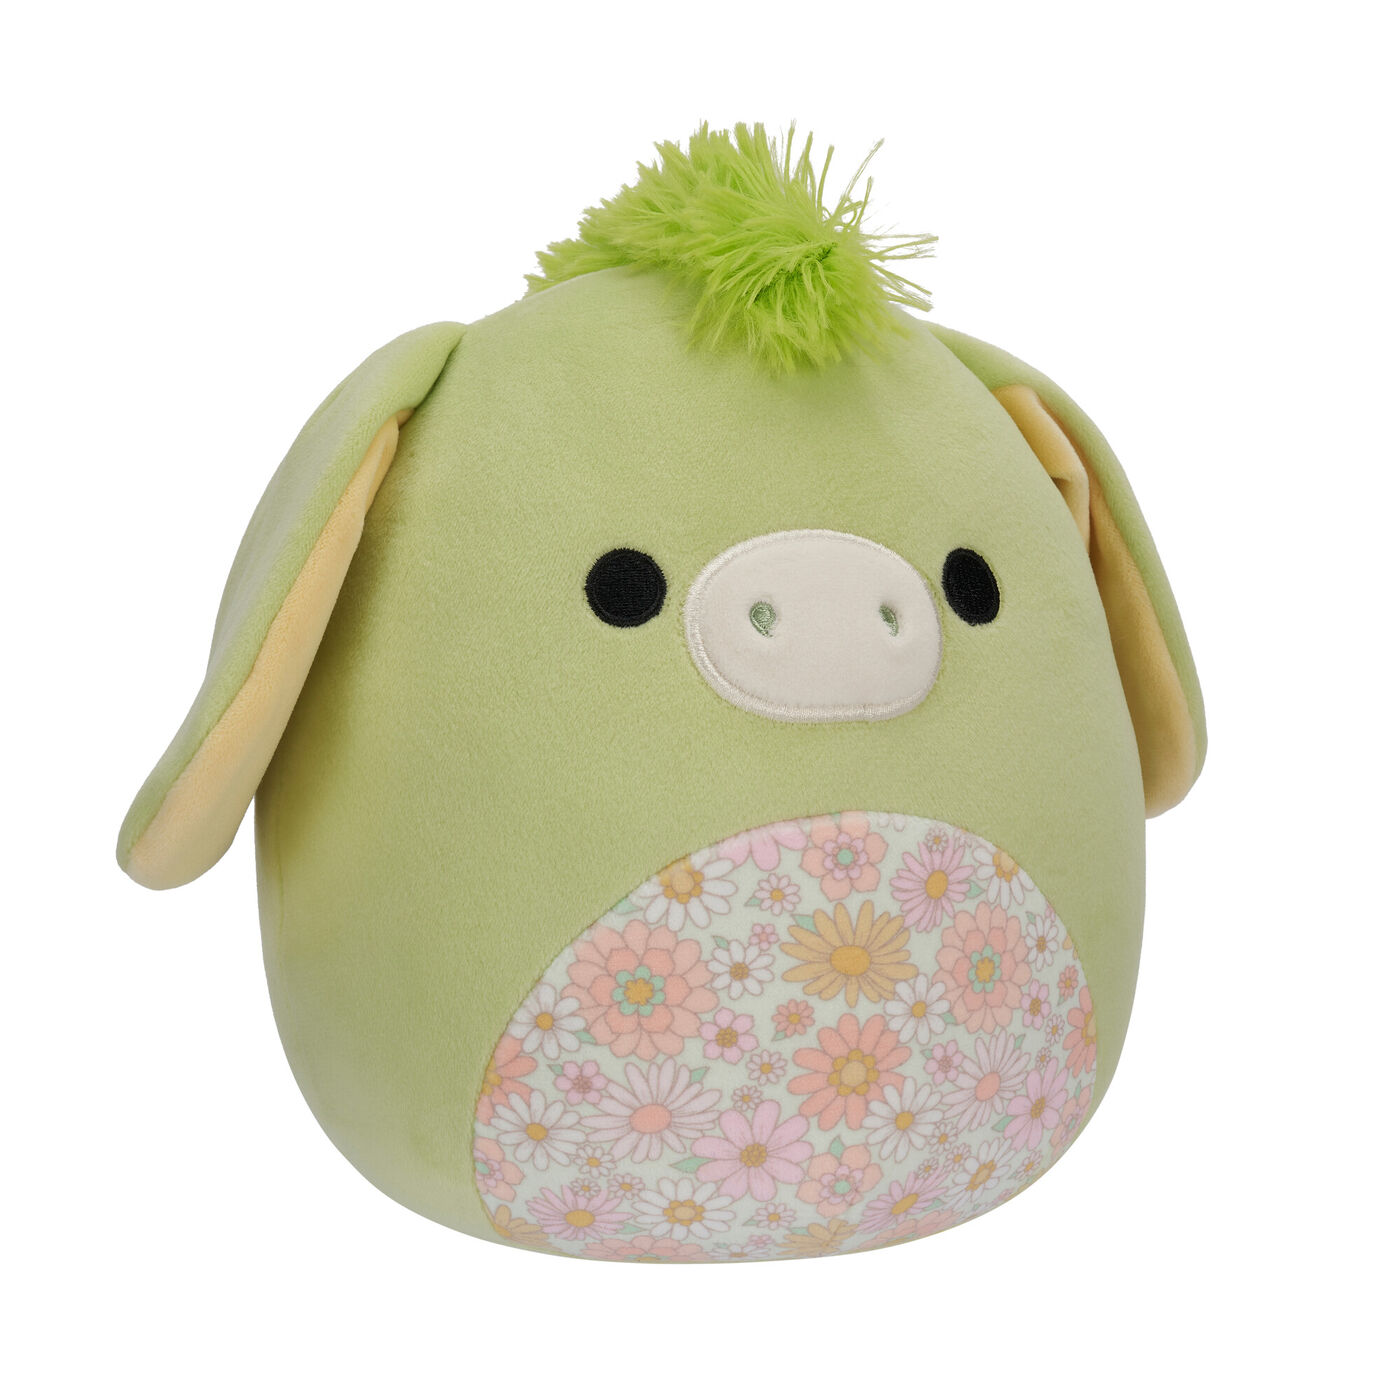 Buy Squishmallows 7.5-Inch Juniper the Green Donkey for GBP 8.99